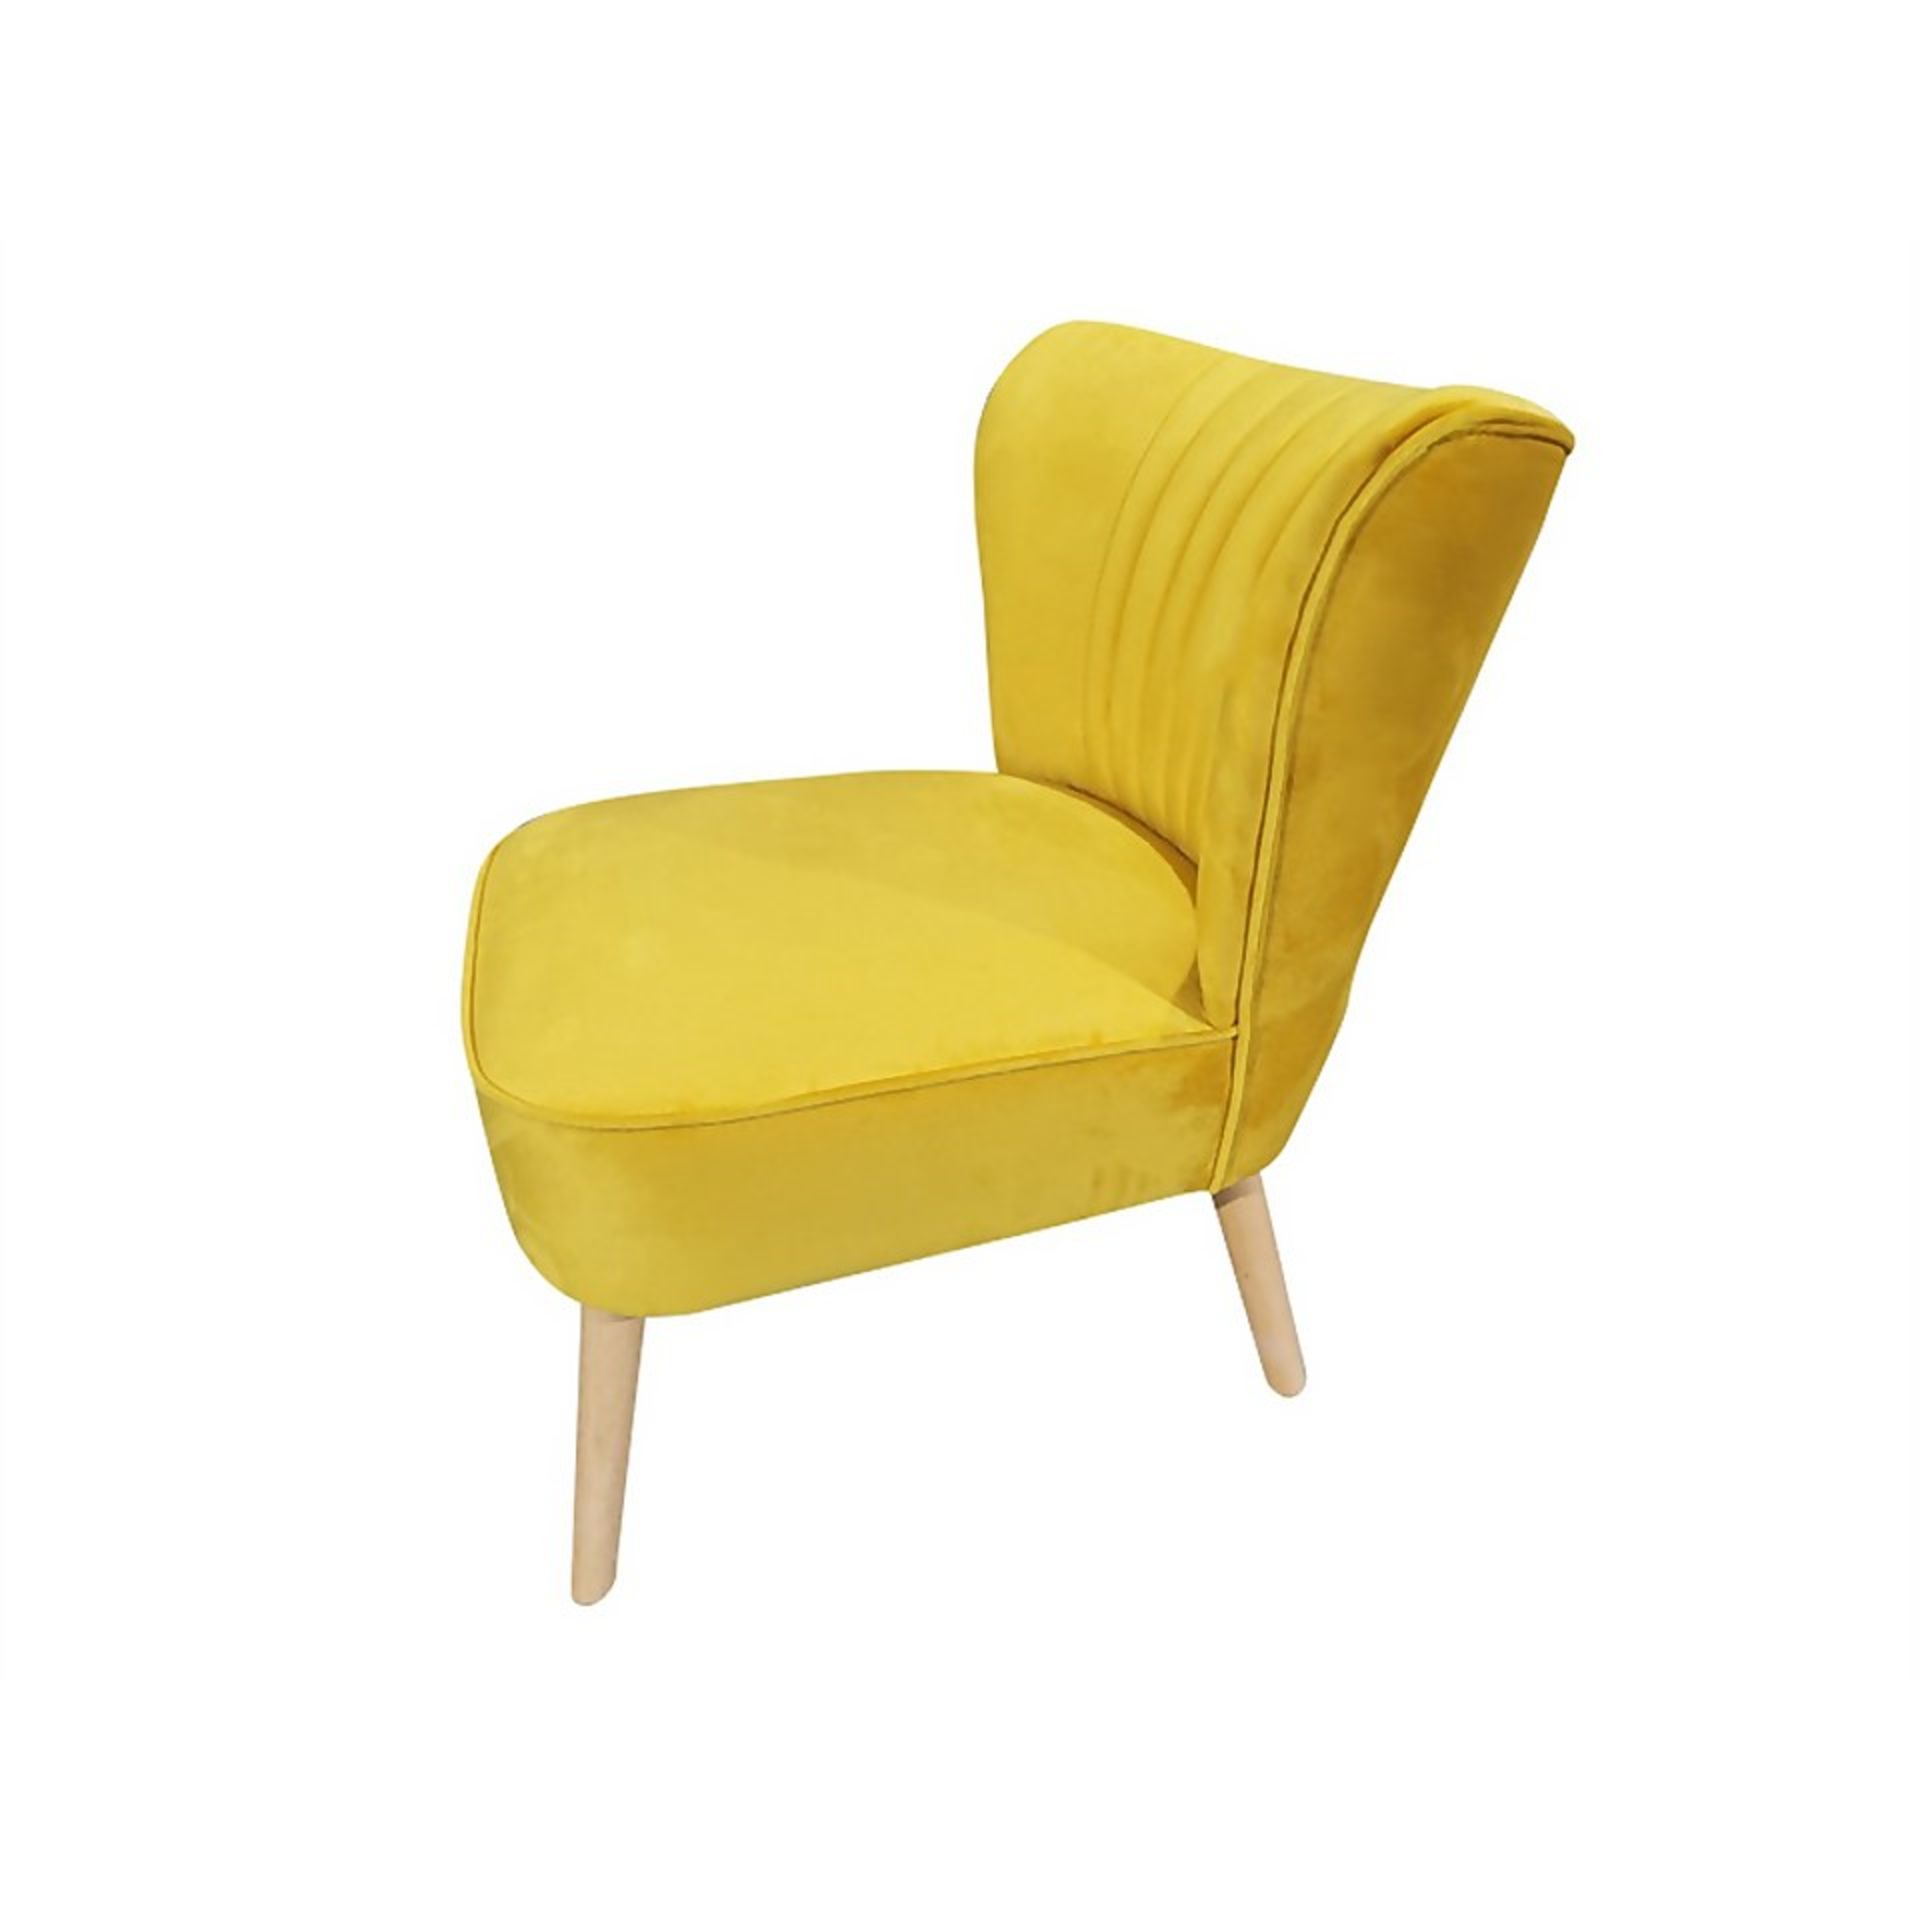 (R6K) 1 X Occasional Chair Ochre. Velvet Cover With Rubberwood Legs (H72xW60xD70cm) - Image 5 of 6